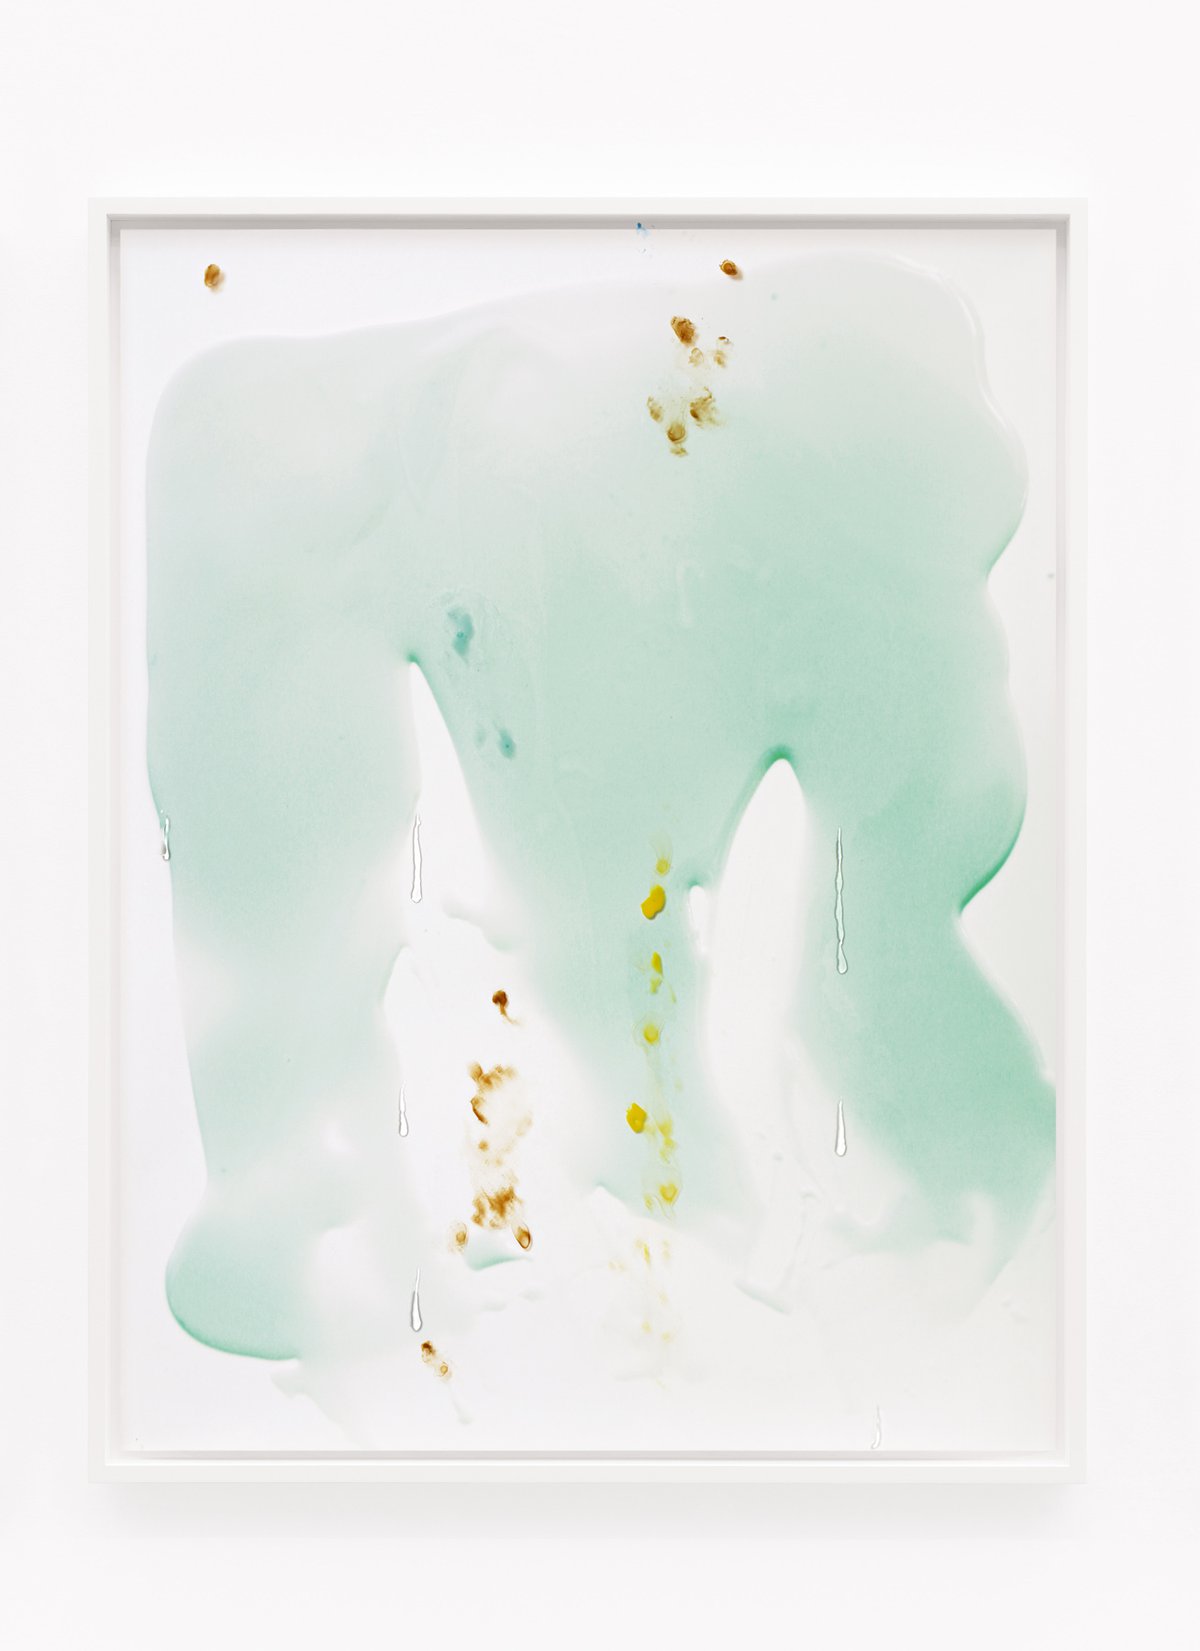 Lisa HolzerThe Party Sequel (Berlin), 2017Pigment print on cotton paper, crystal clear 202/1 polyurethane and acrylic paint on glass110.3 x 86.3 cm